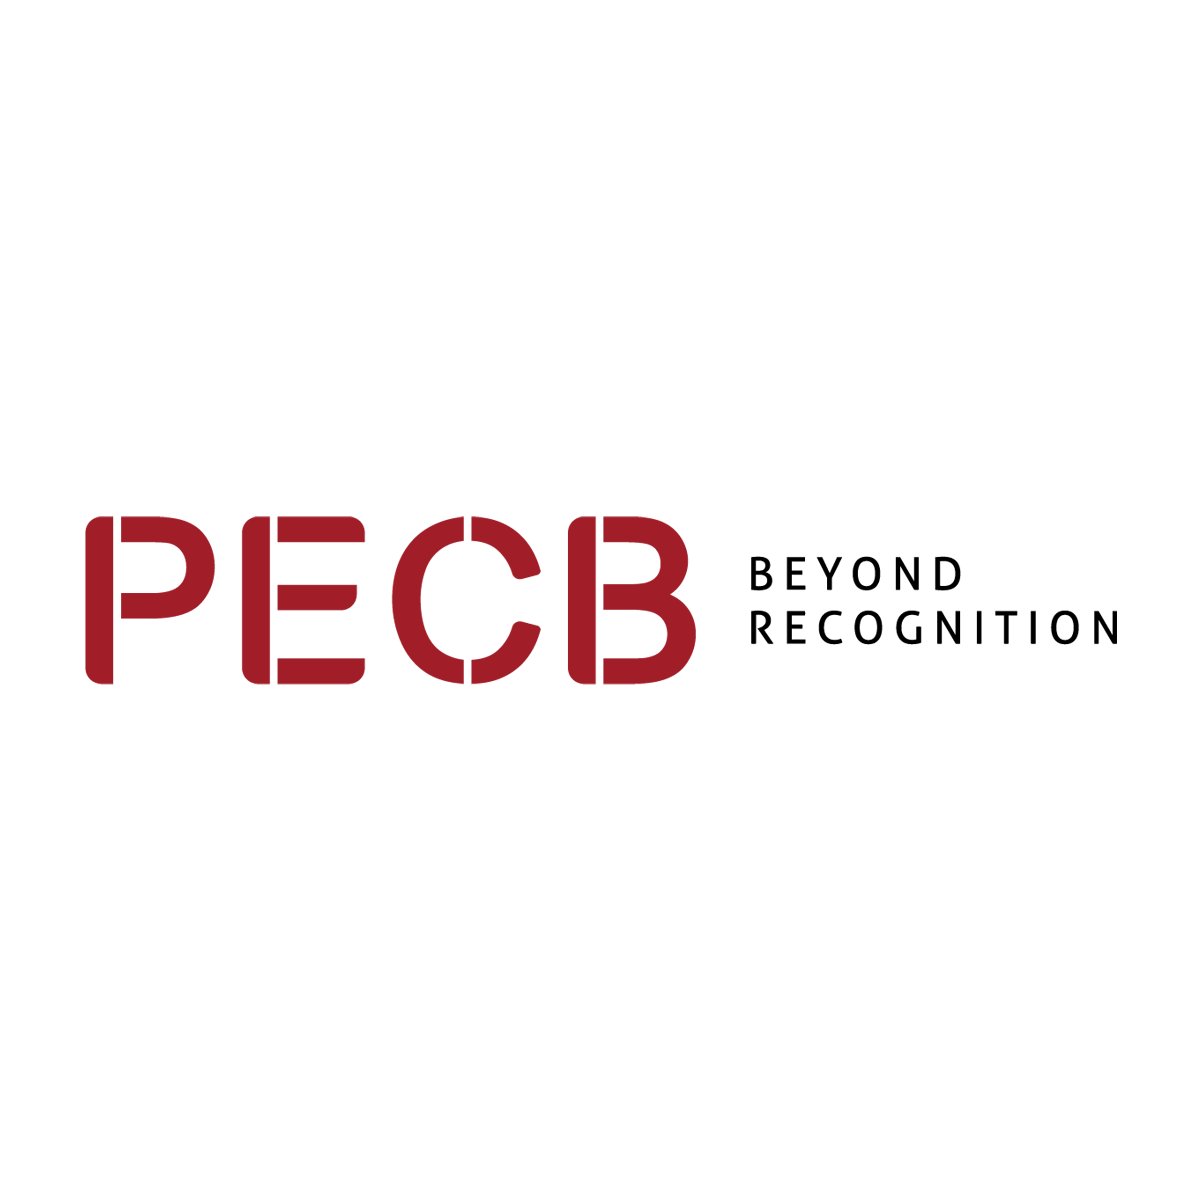 About PECB 